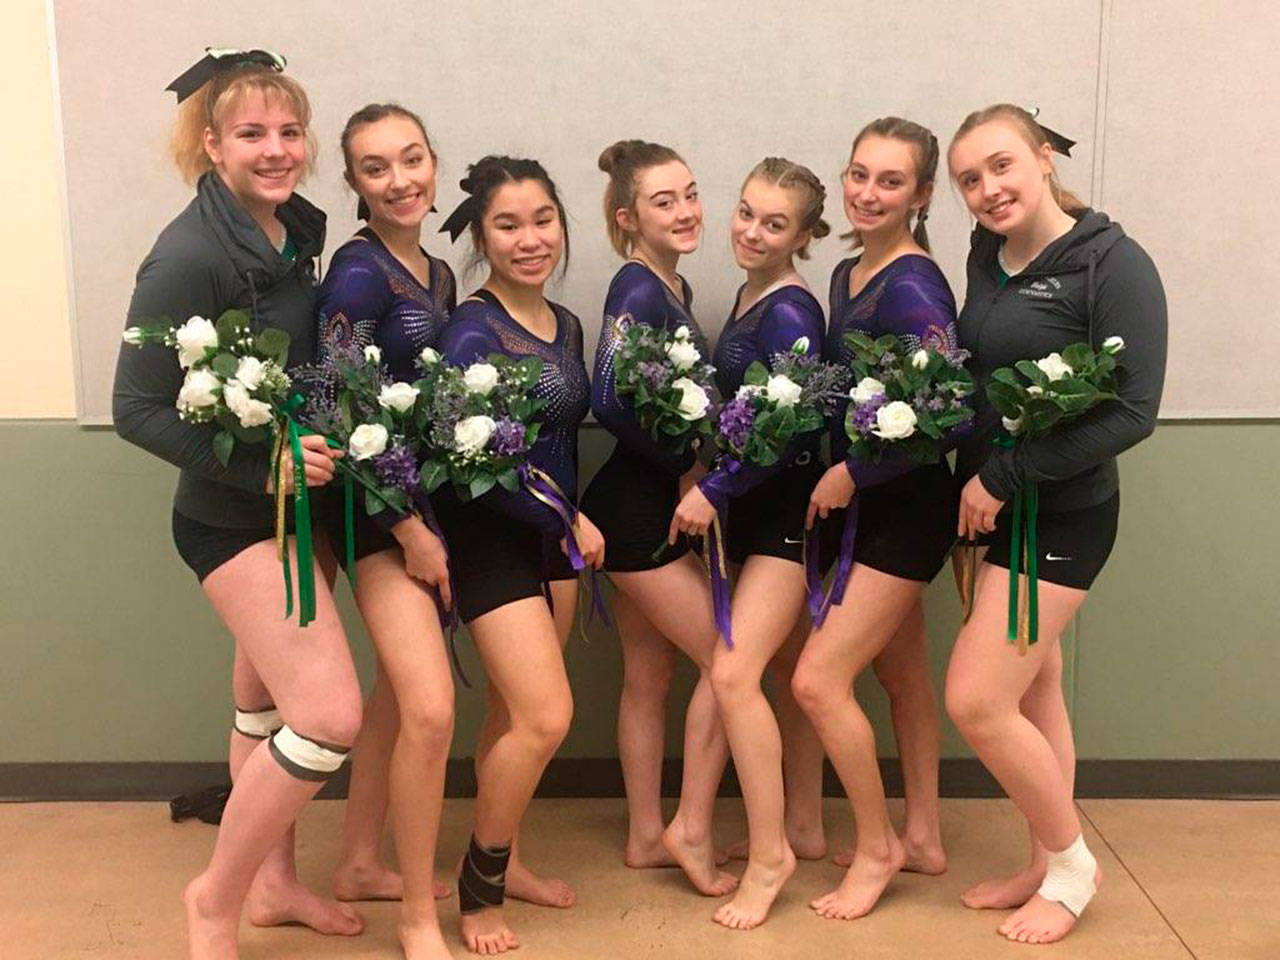 Competing for Sequim and Port Angeles gymnastics teams at the West Central District meet this past weekend are, from left, Aiesha LaTourette, Gracie Sharp, Lesae Pfeffer, Danica Pierson, Kori Miller, Emma Sharp and Maizie Tucker. Submitted photo